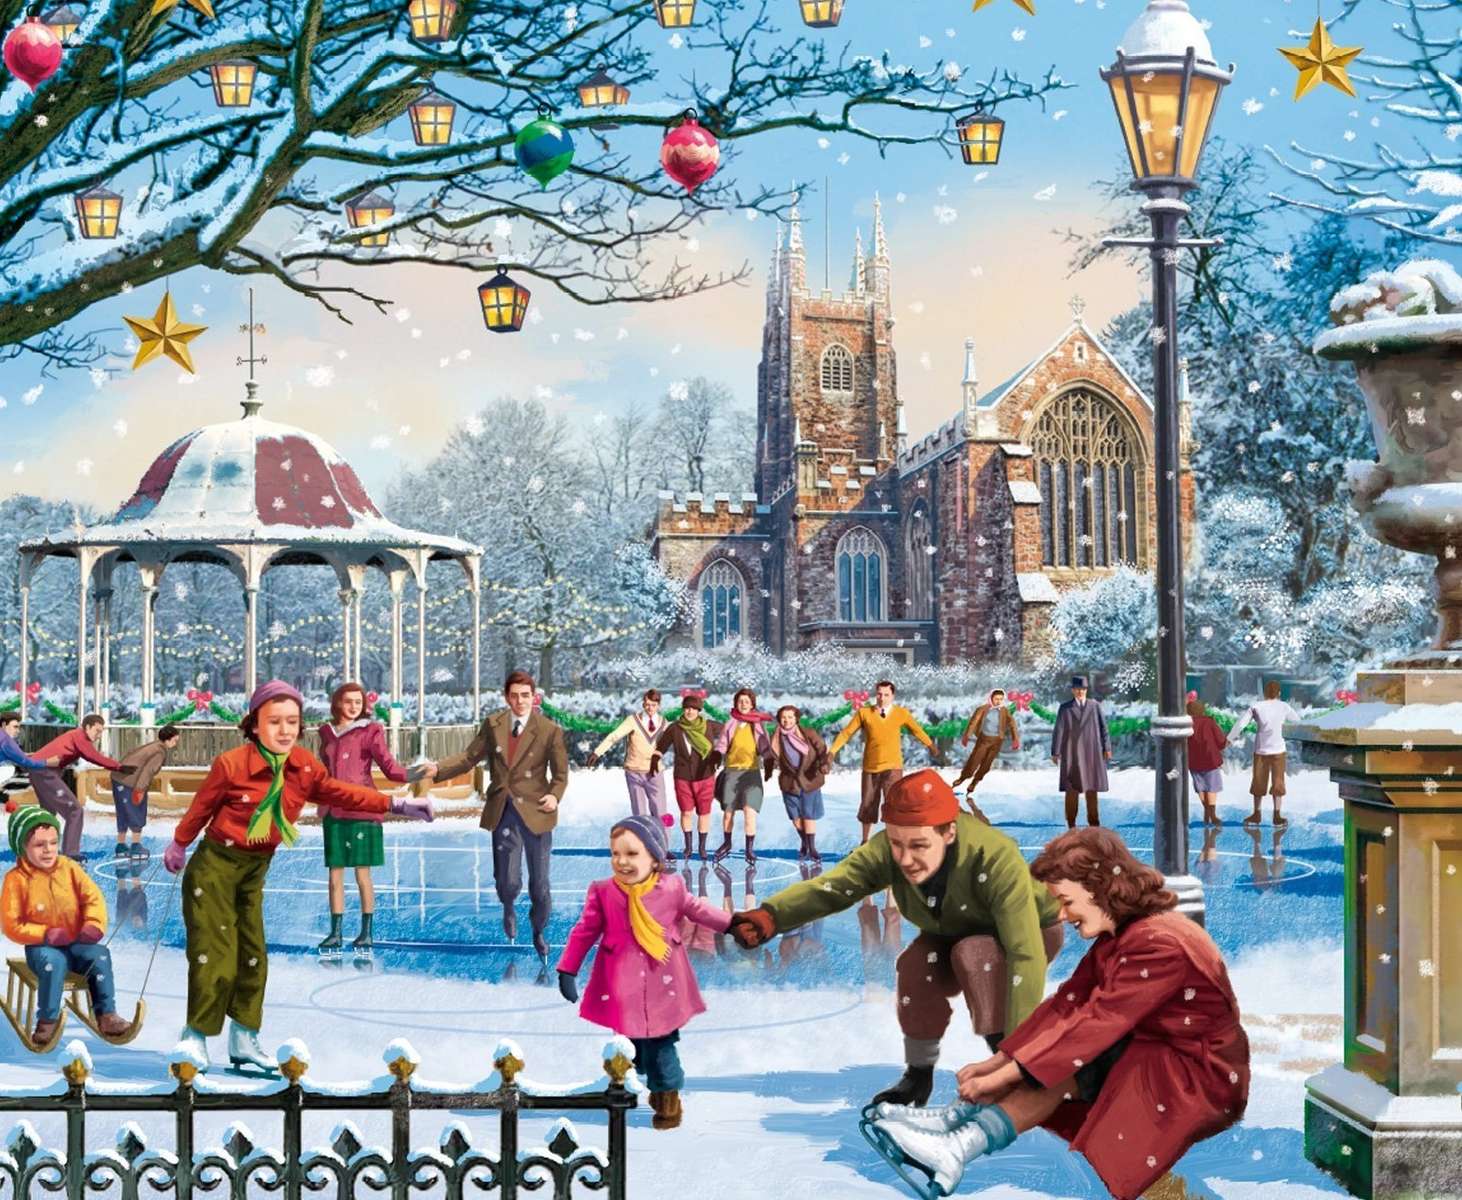 At the ice rink on Christmas Day online puzzle